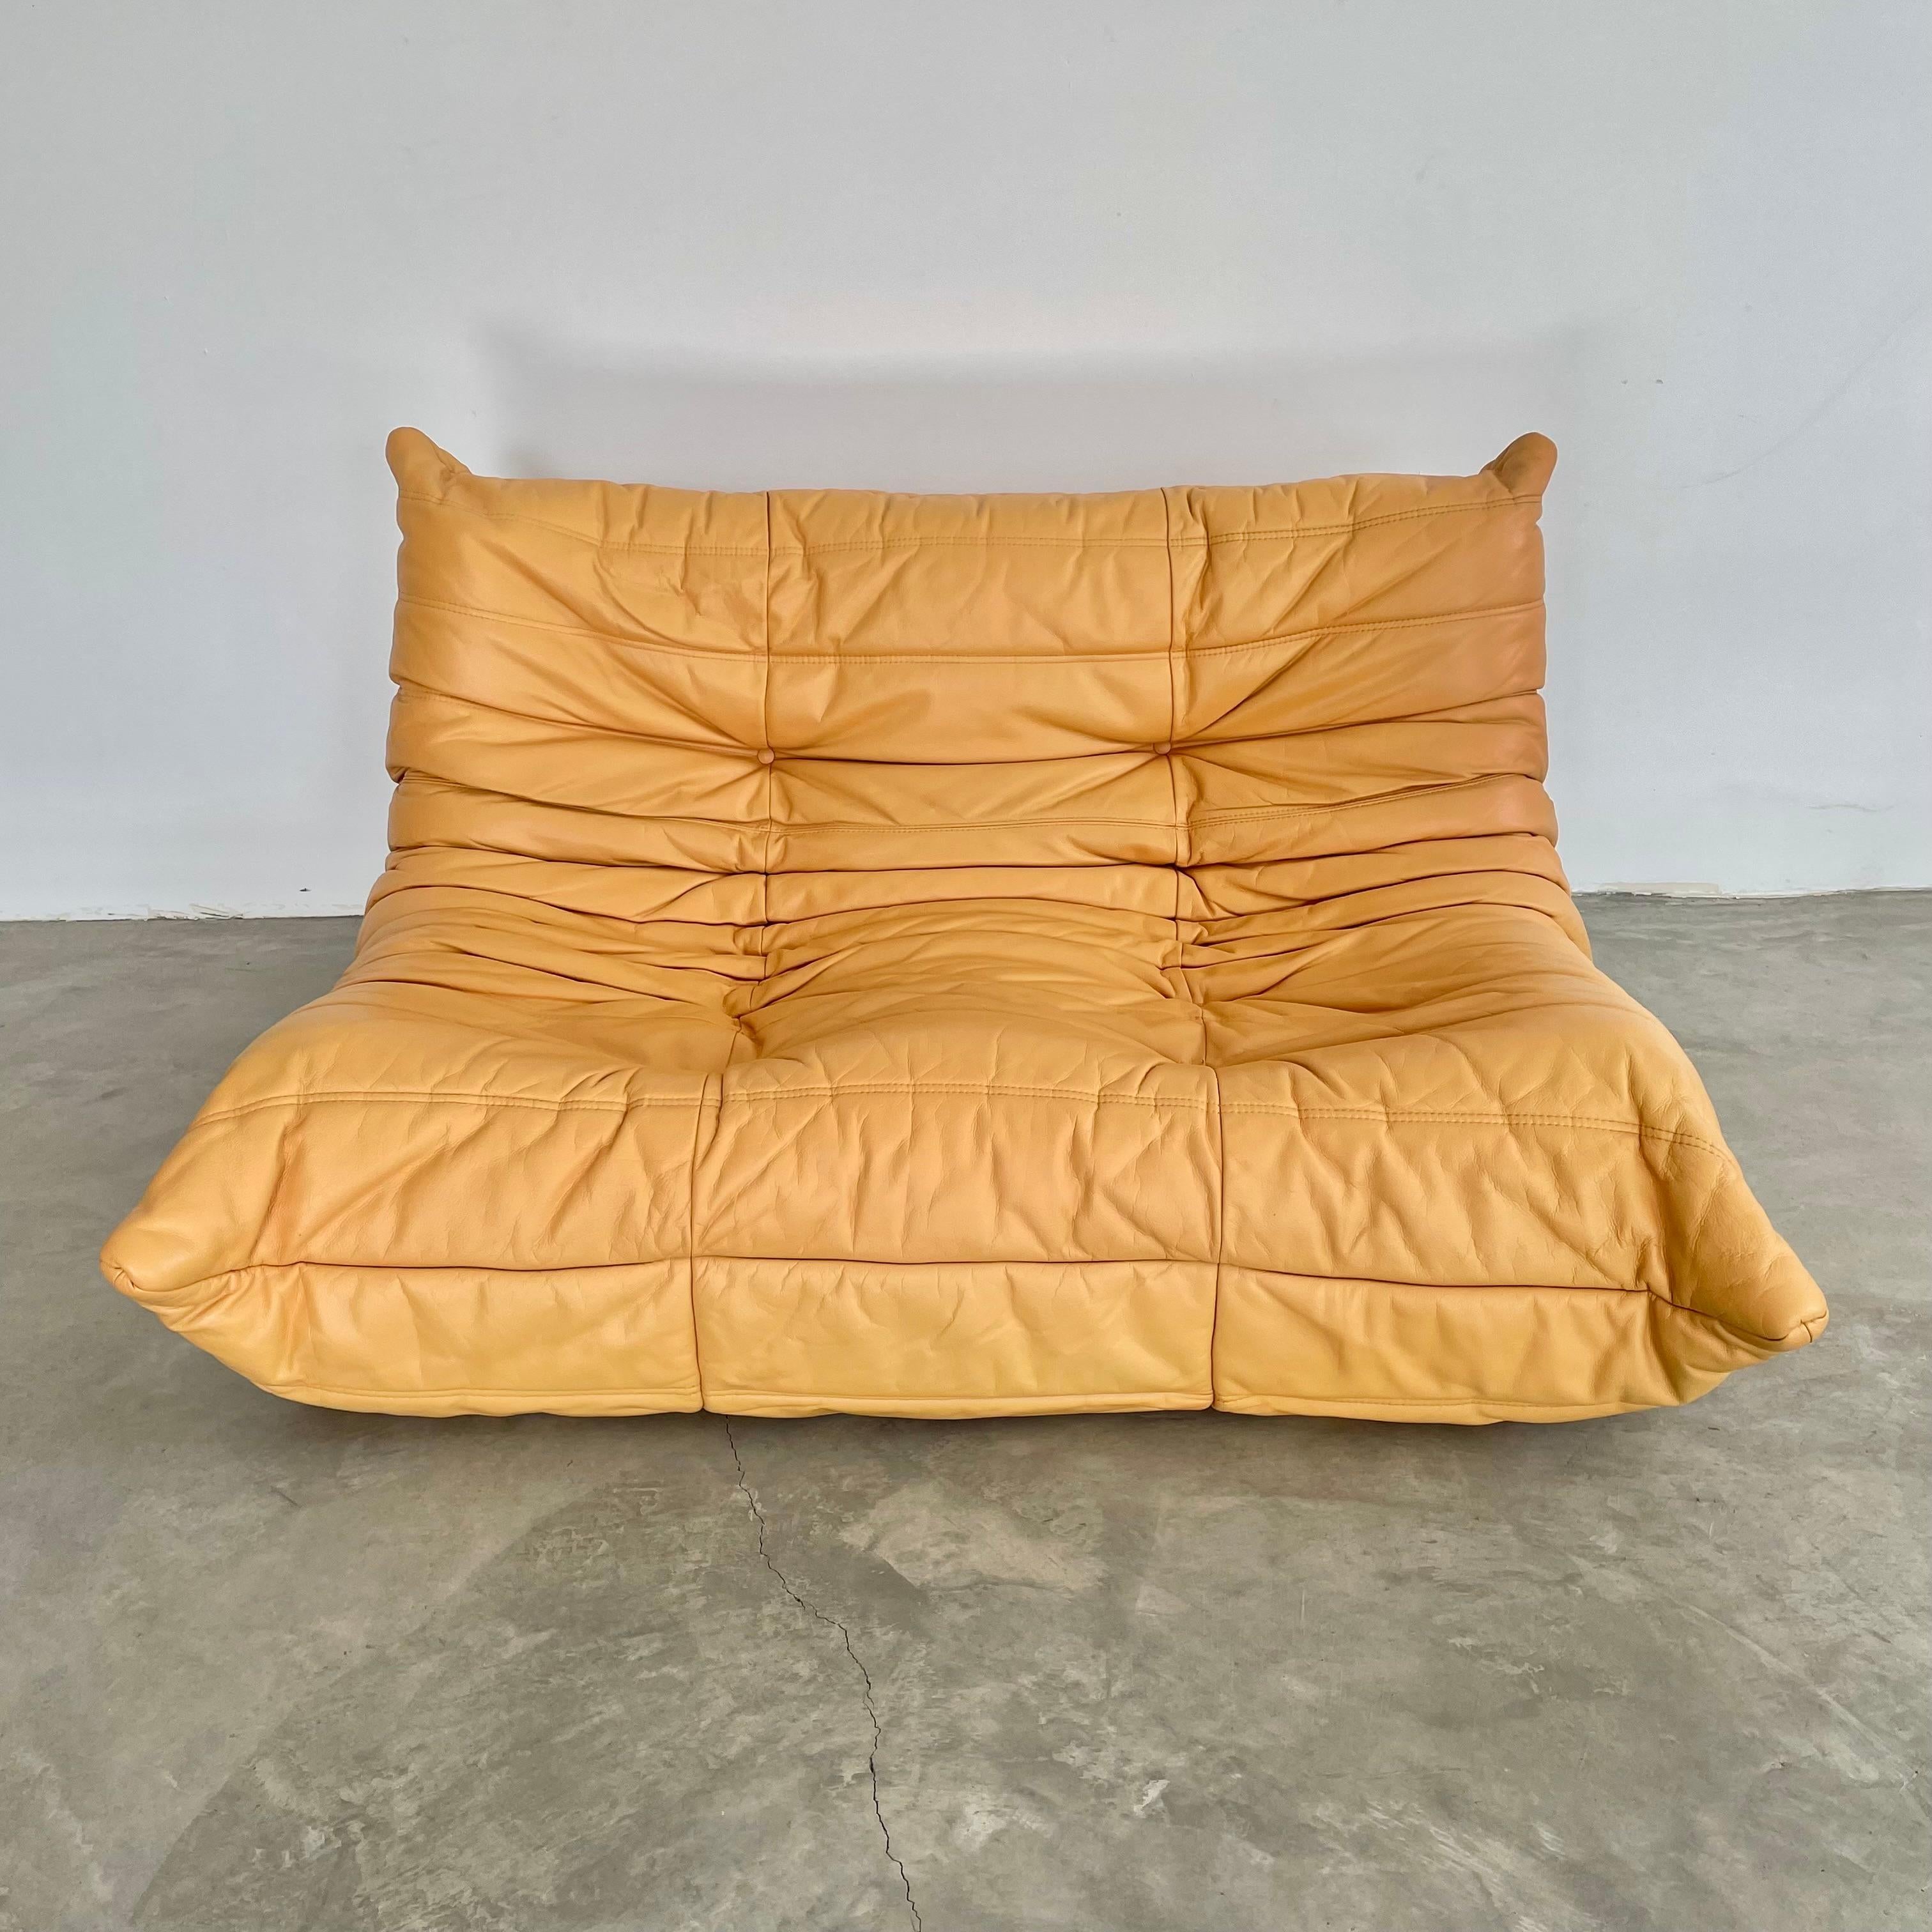 Classic French two seater Togo sofa by Michel Ducaroy for luxury brand Ligne Roset. Originally designed in the 1970s the iconic togo sofa is now a design classic. This sofa comes in its original vintage yellow leather which remains in great